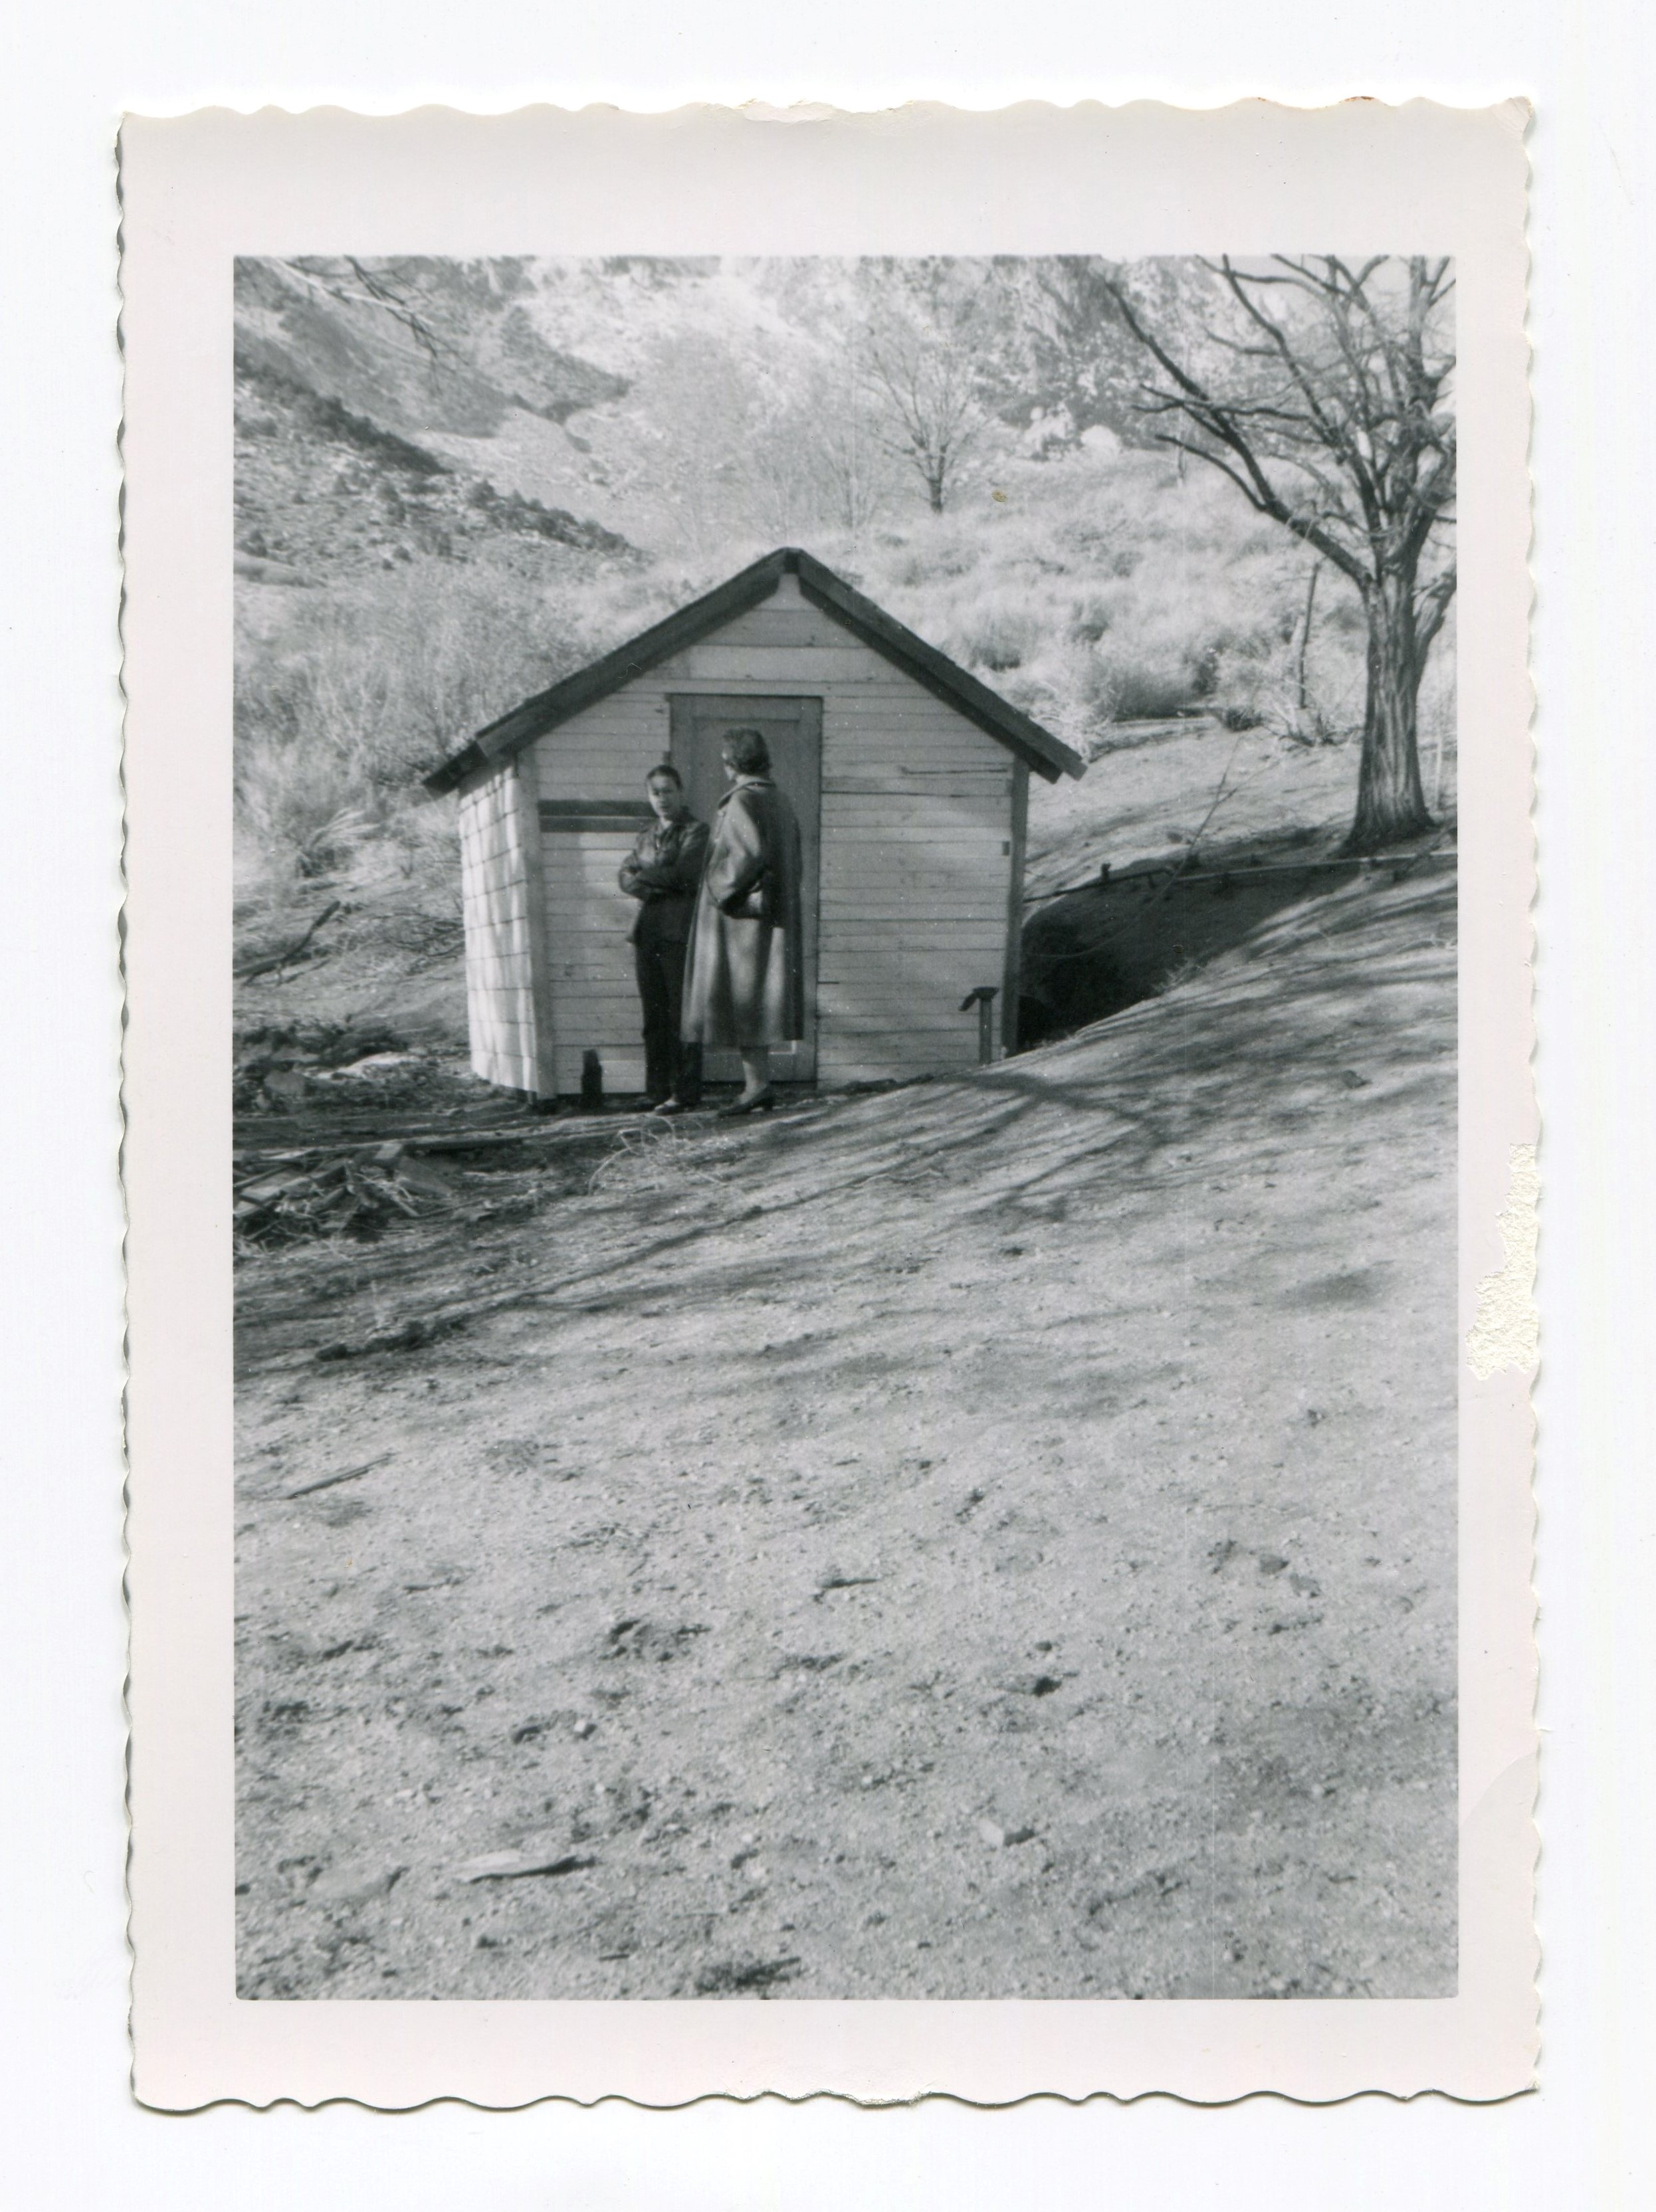 1960 Assembly of Man Ranch - Gertrude & Peggy de Cono outside the well-house